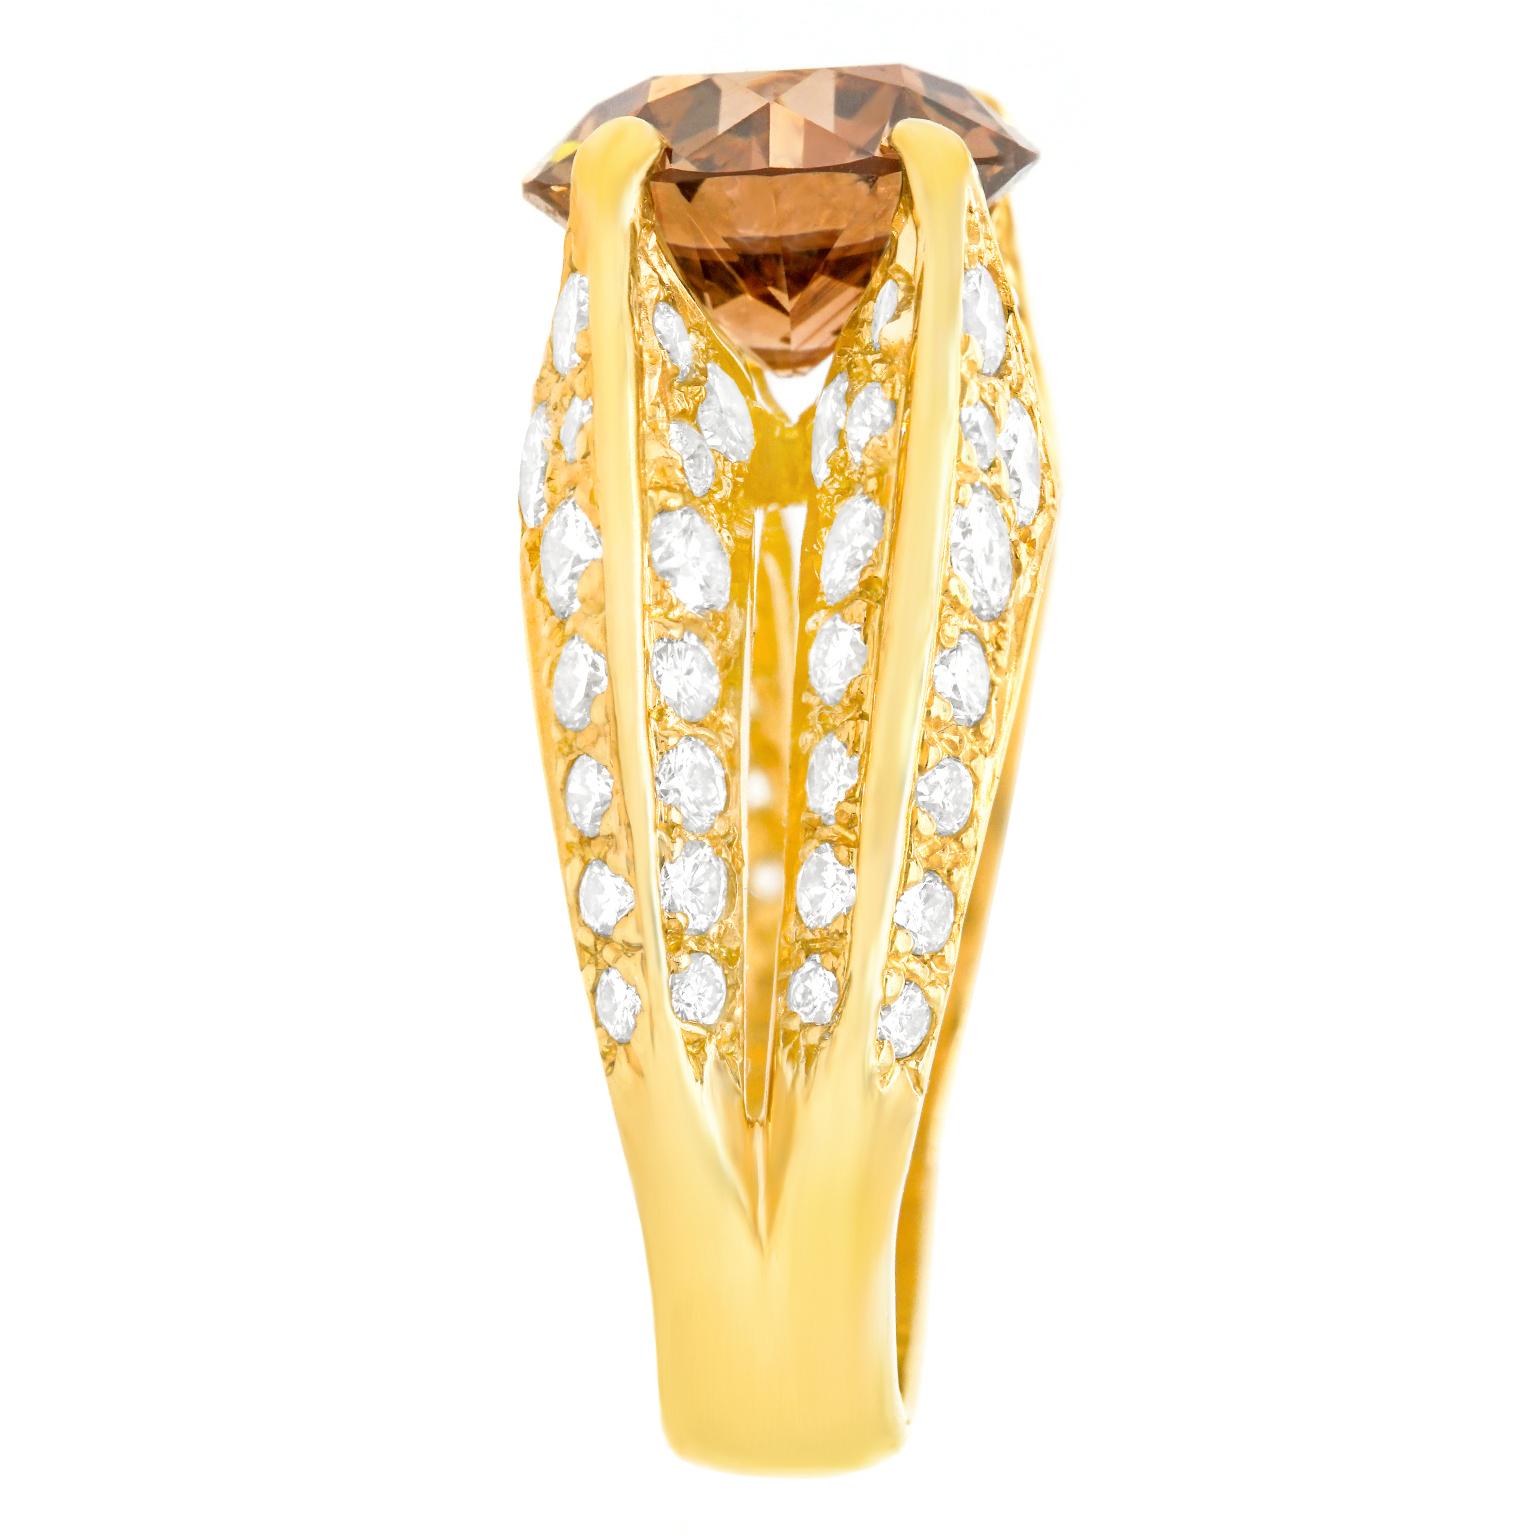 Women's or Men's Spectacular Gold Ring by Jose Hess with 4.17 Carat Fancy Diamond GIA For Sale